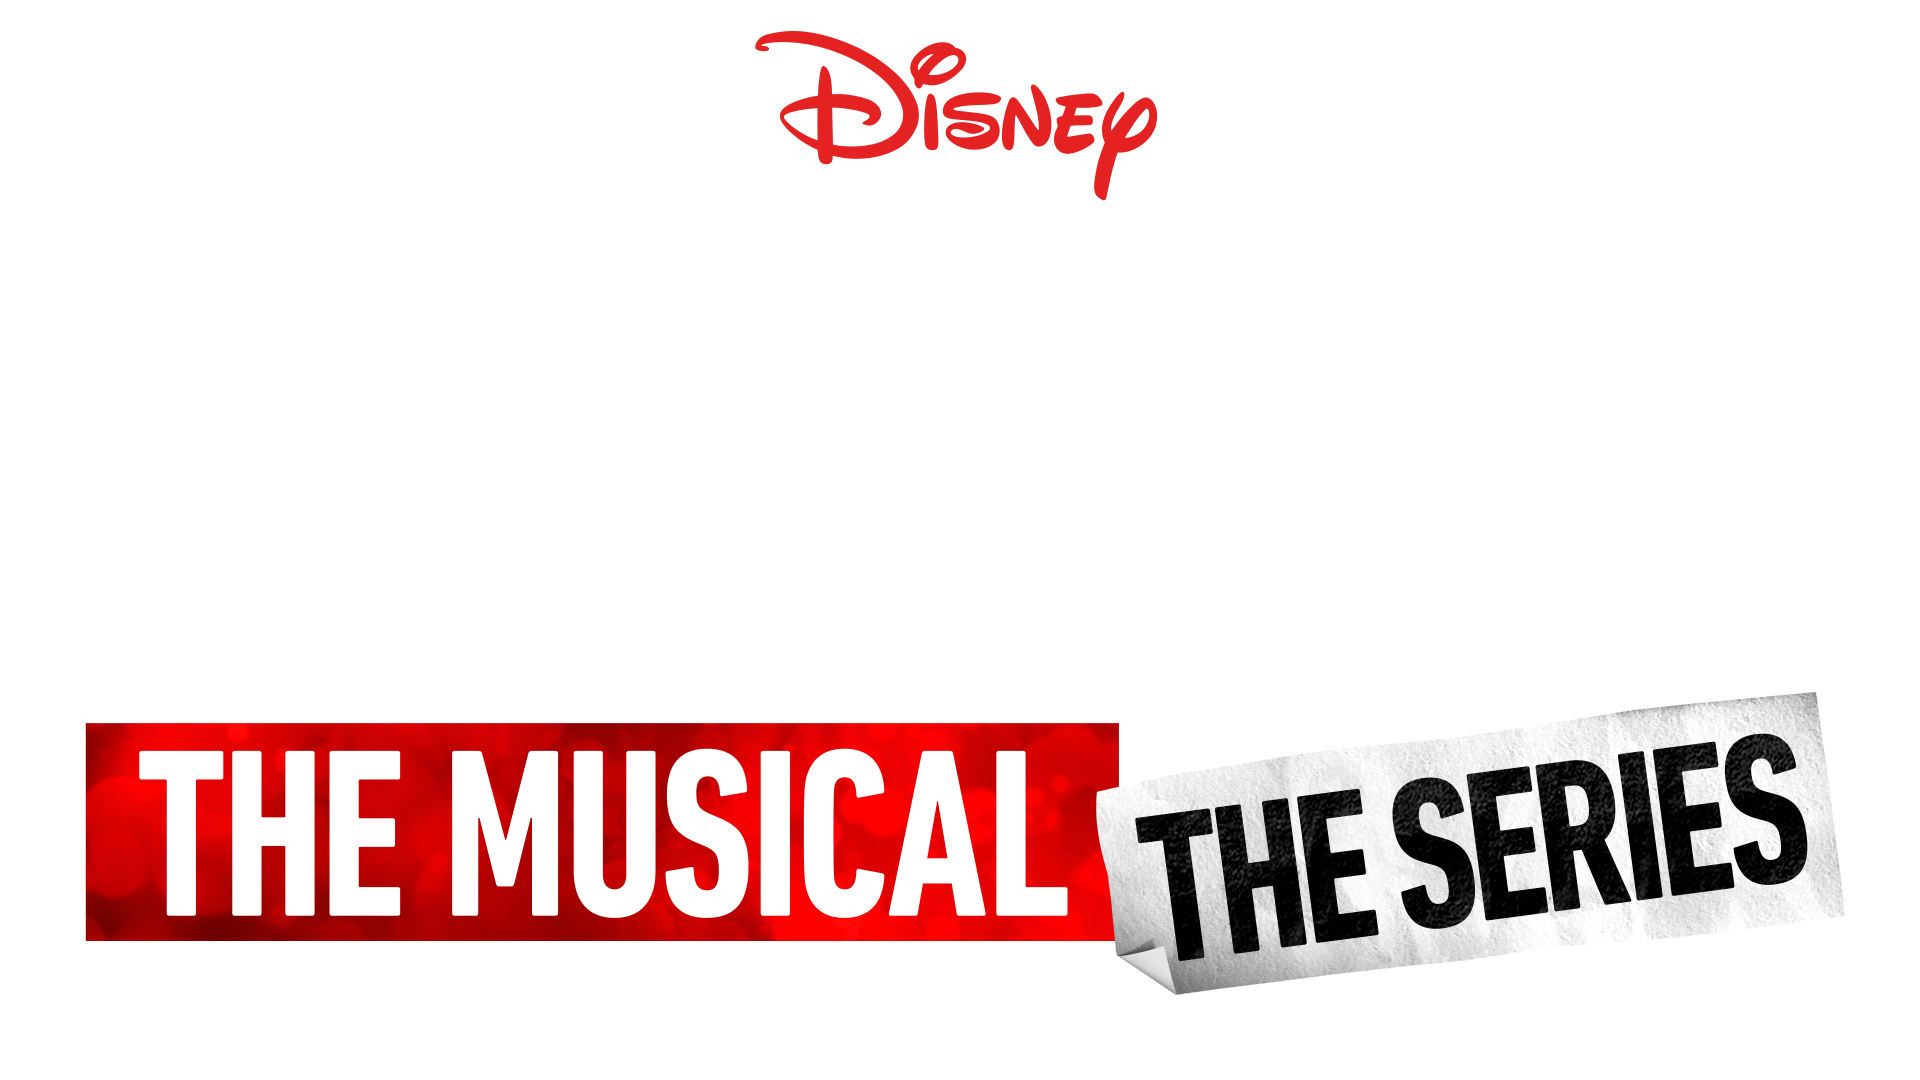 The series high school musical The Series